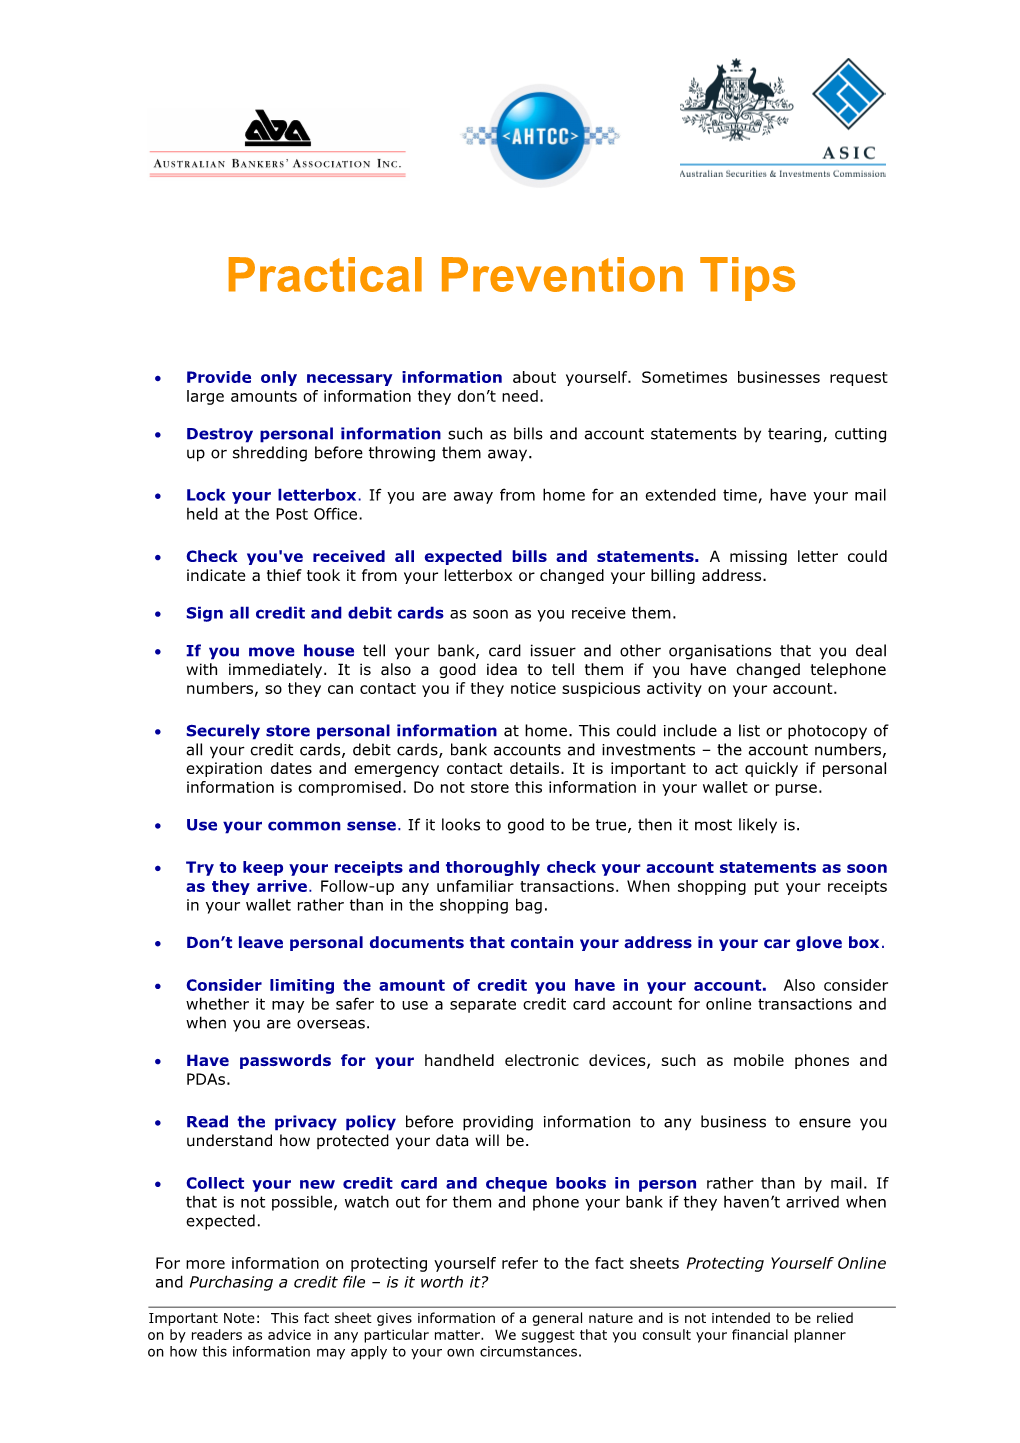 Practical Prevention Tips